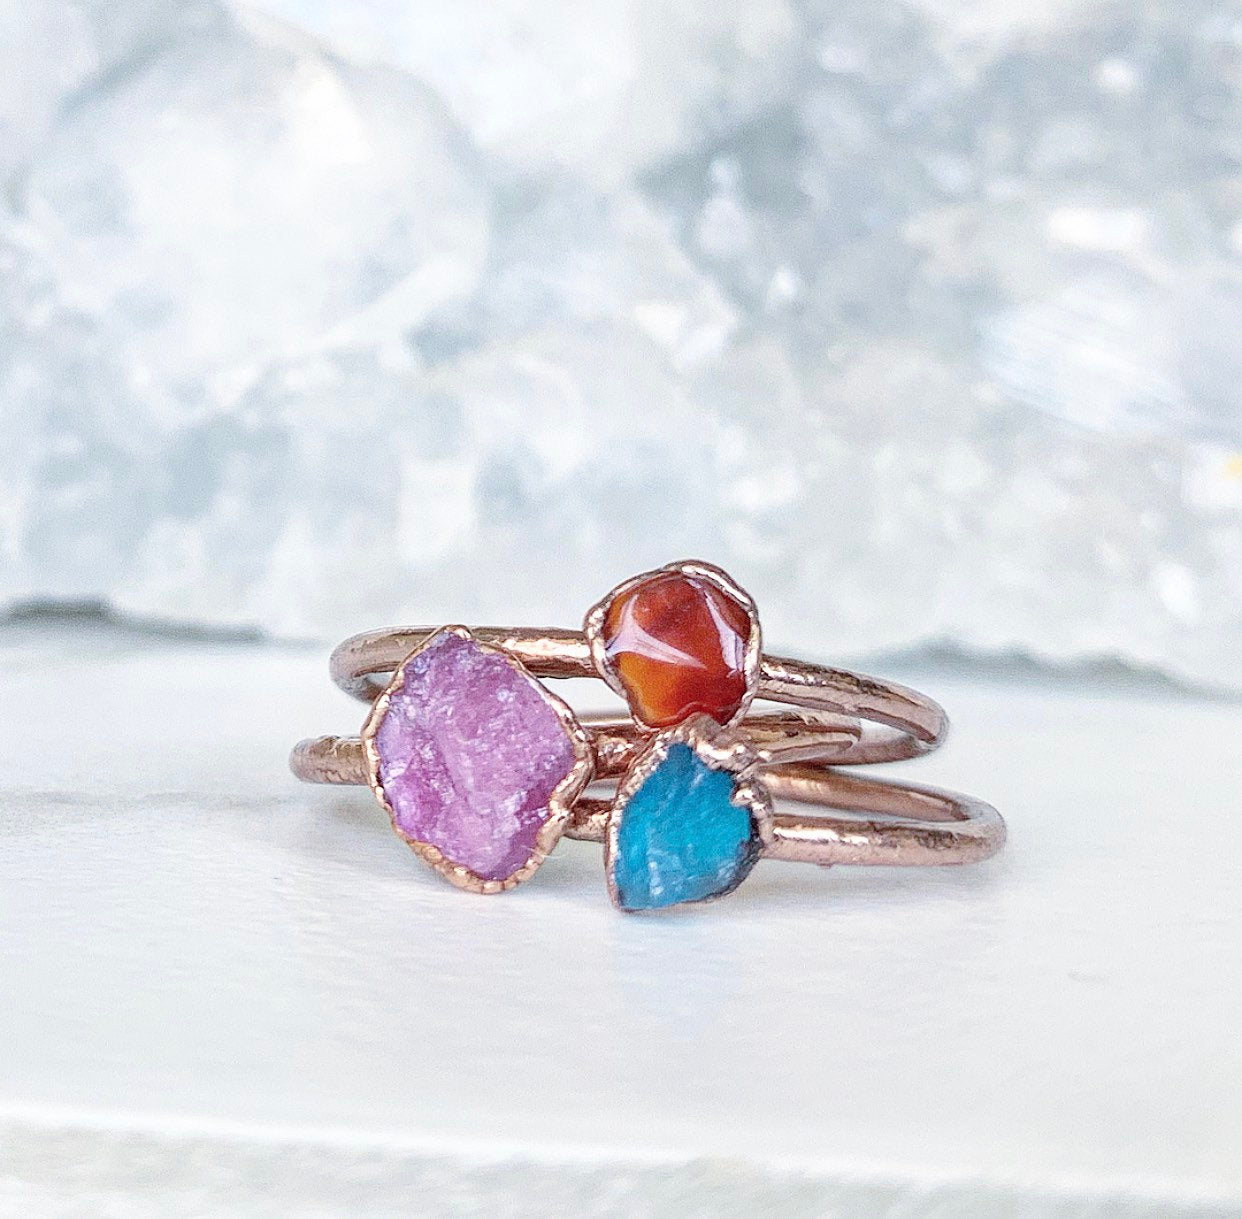 Dainty Pink Tourmaline Ring, Delicate Raw Healing Crystal Ring, Tiny Pink Crystal Ring, October Birthstone Gift, Copper Crystal Stacker